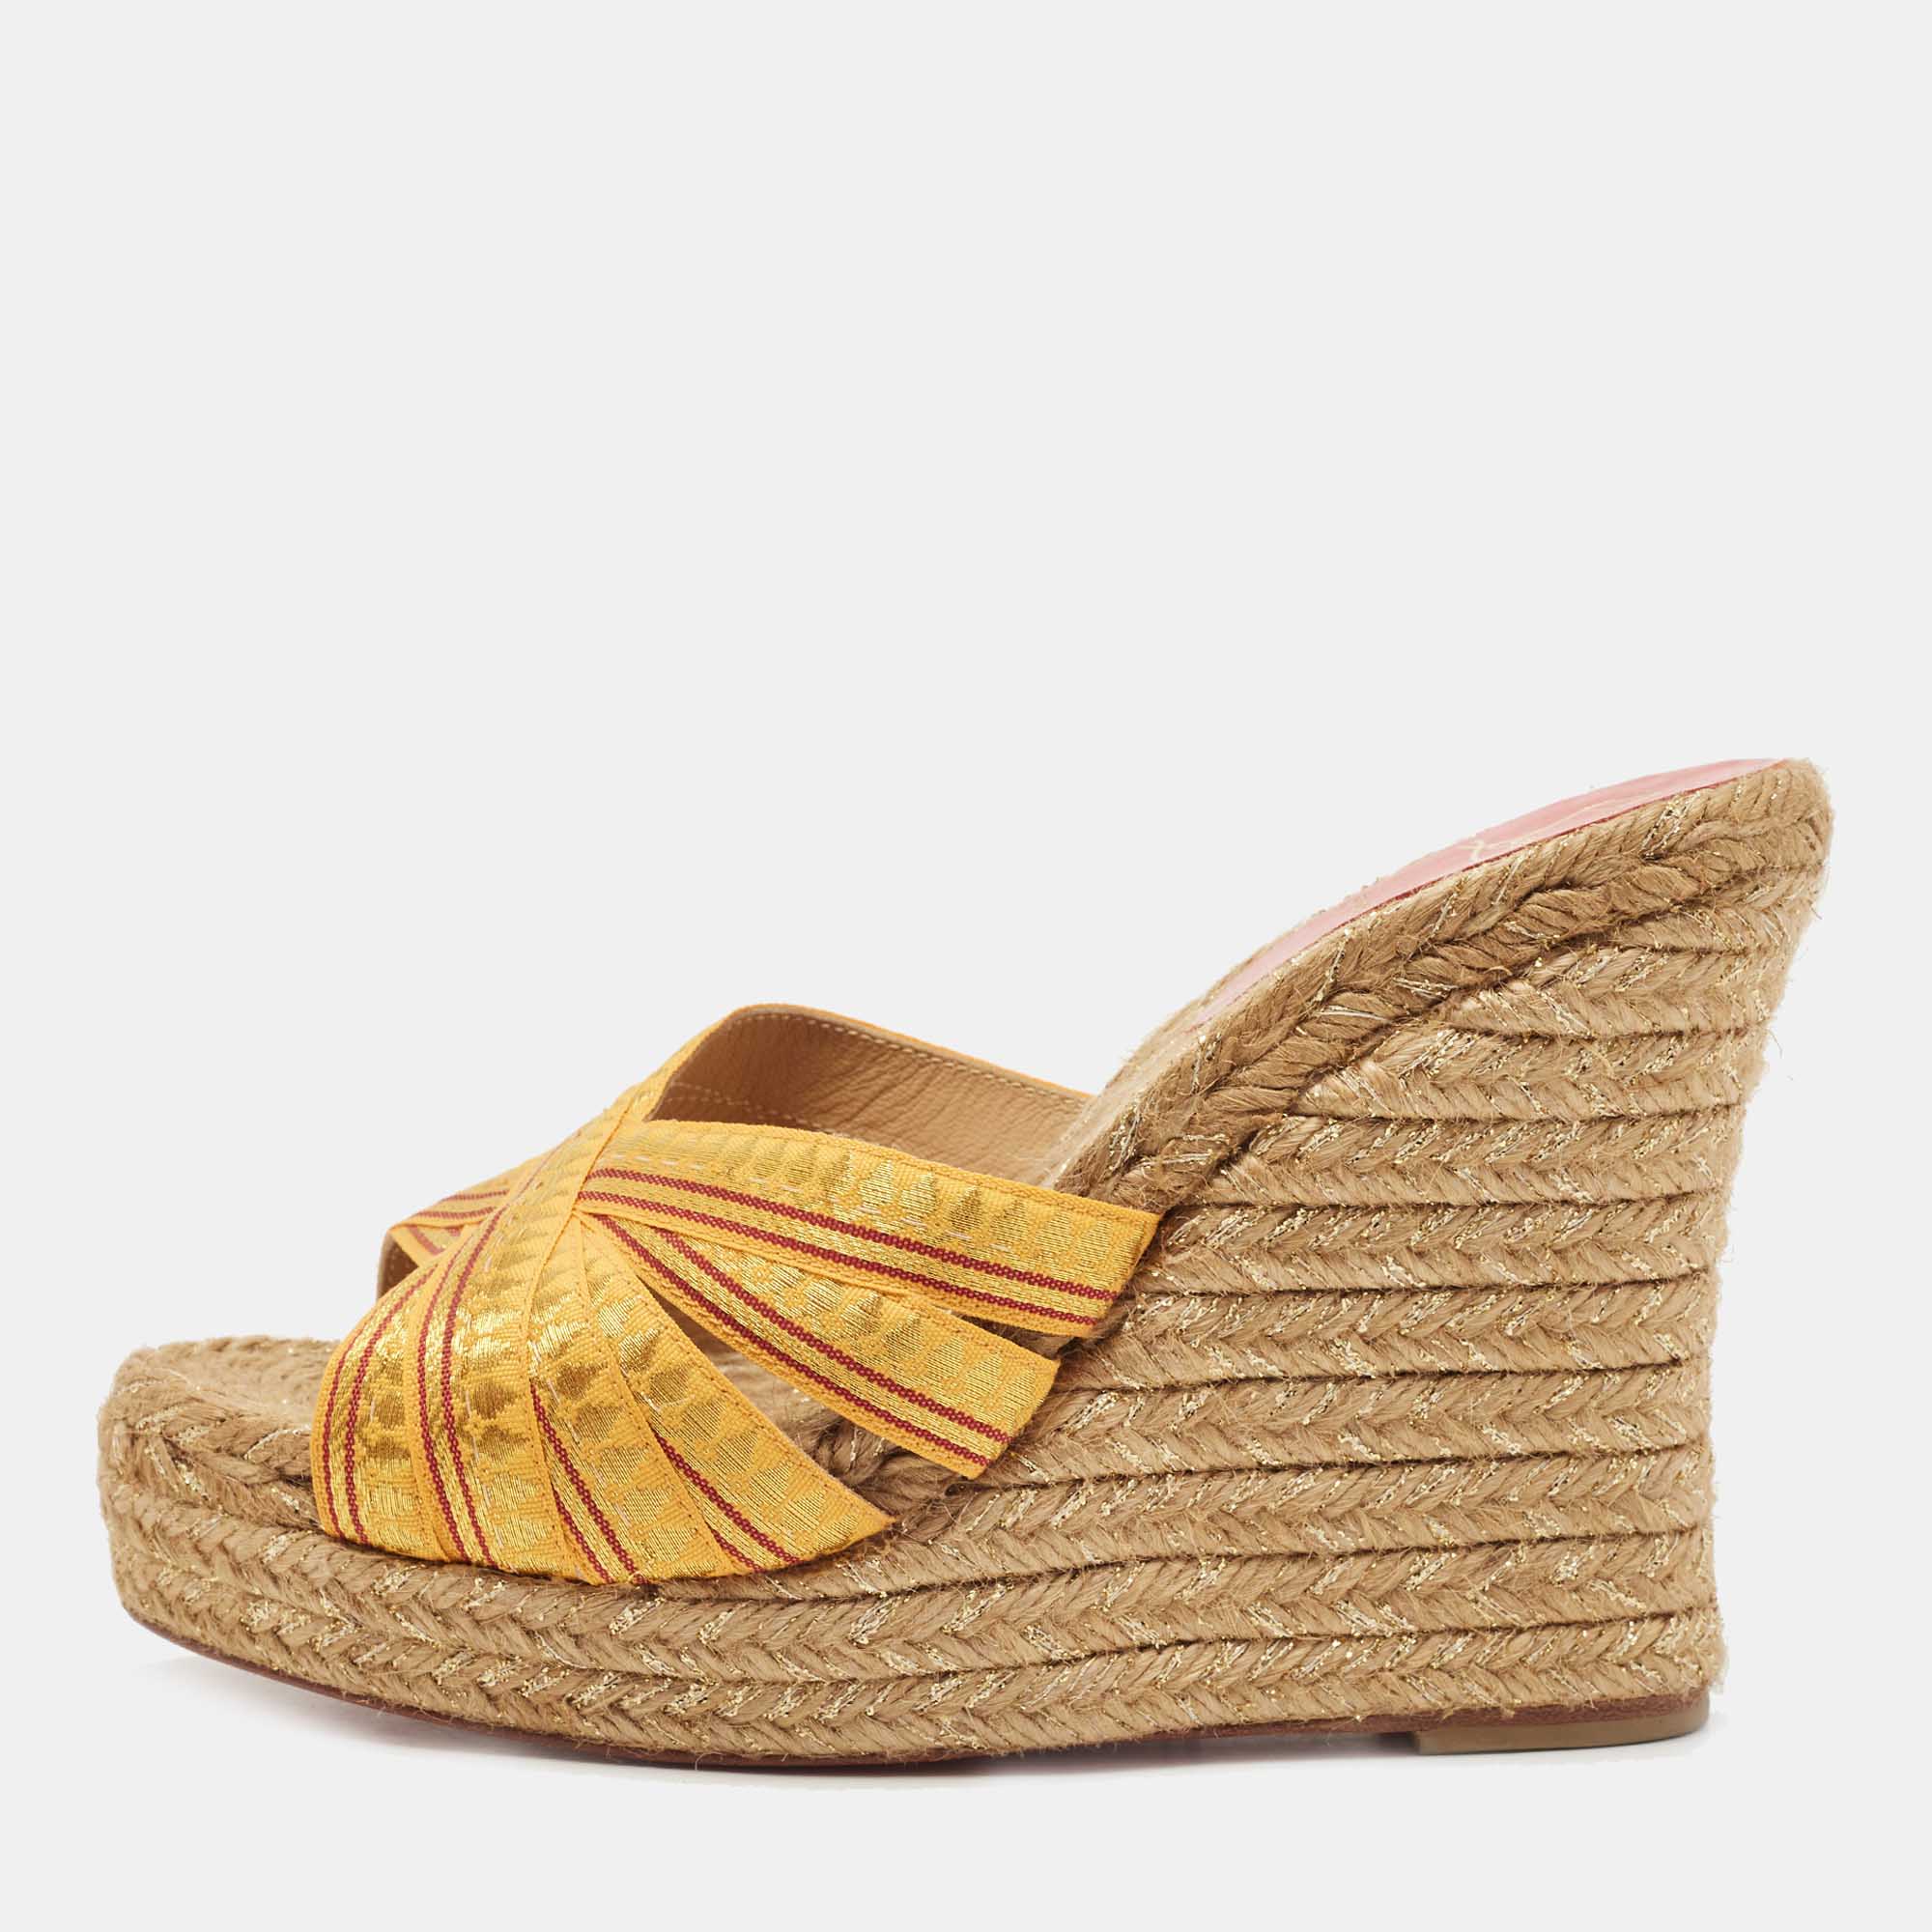 Christian louboutin yellow/gold lace espadrille wedge slide sandals size 37